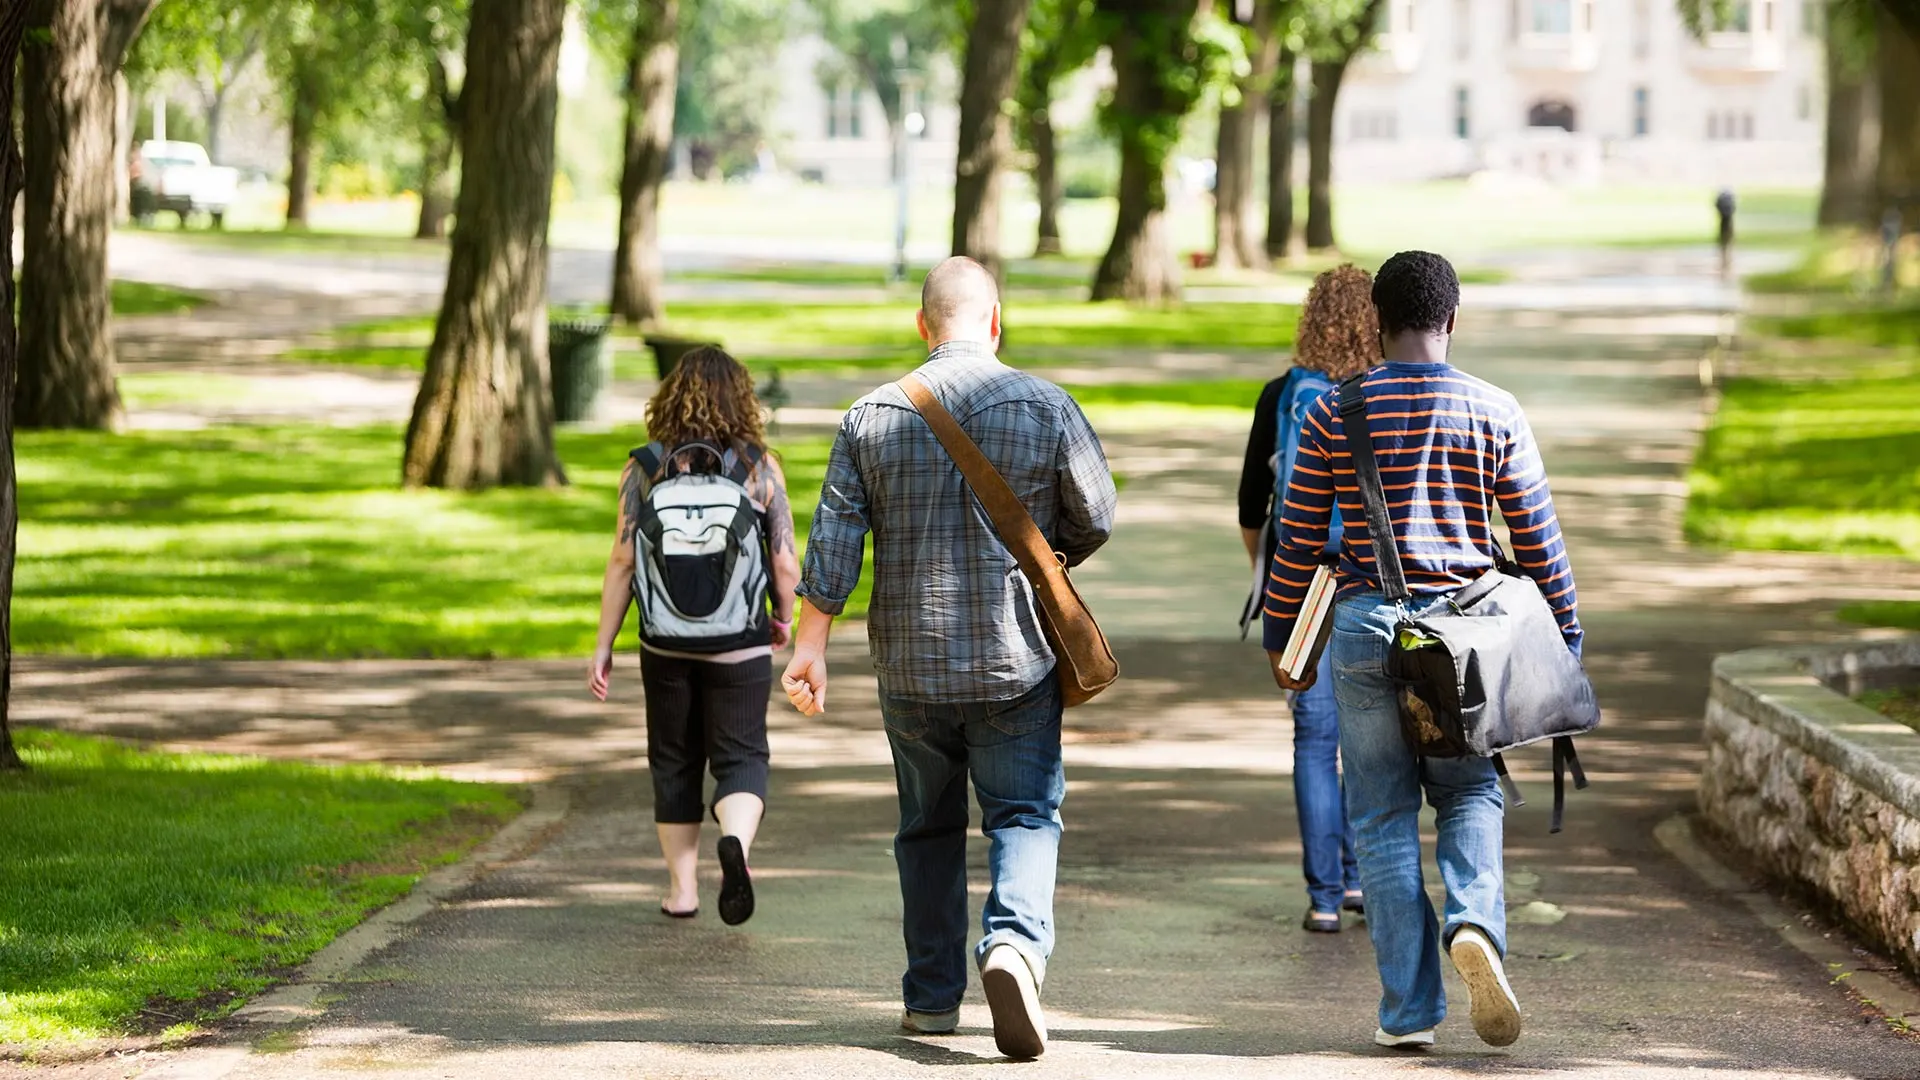 Students walking through a college campus on a sunny afternoon.